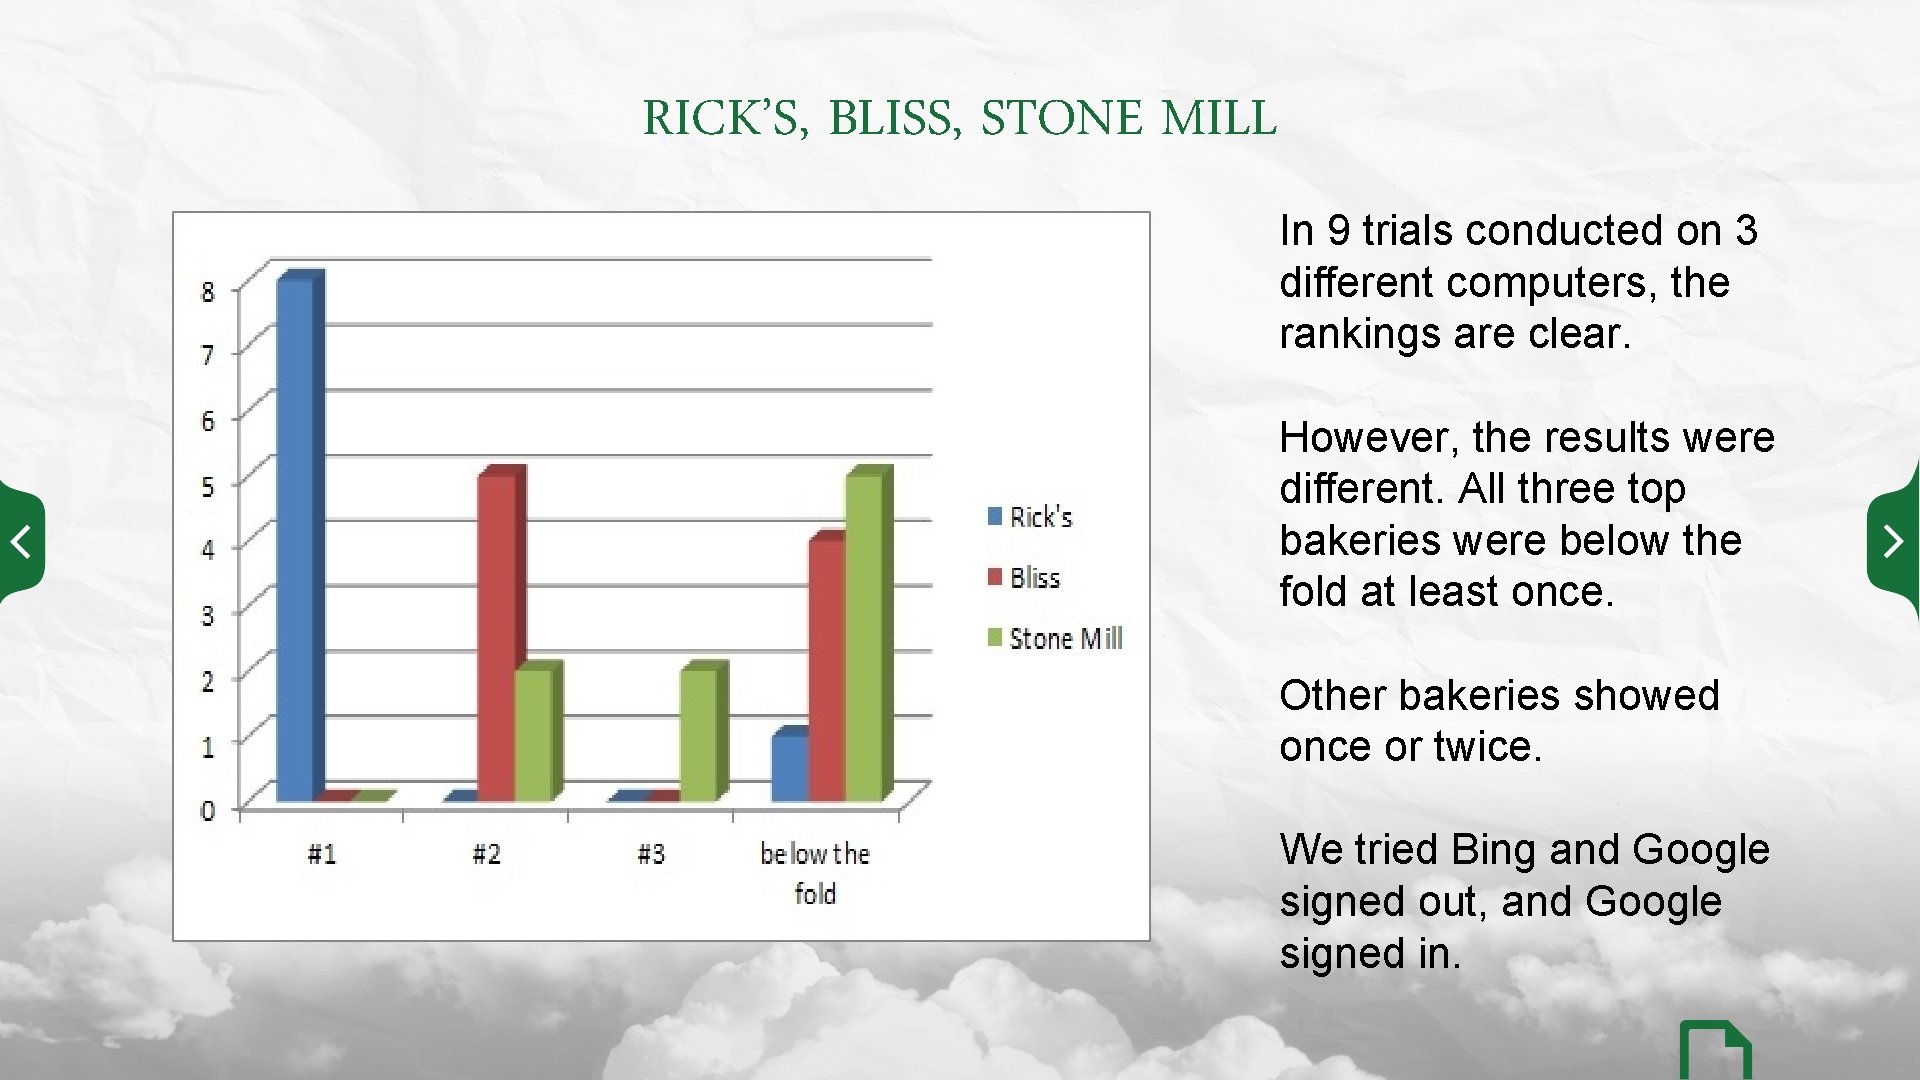 RICK’S, BLISS, STONE MILL In 9 trials conducted on 3 different computers, the rankings